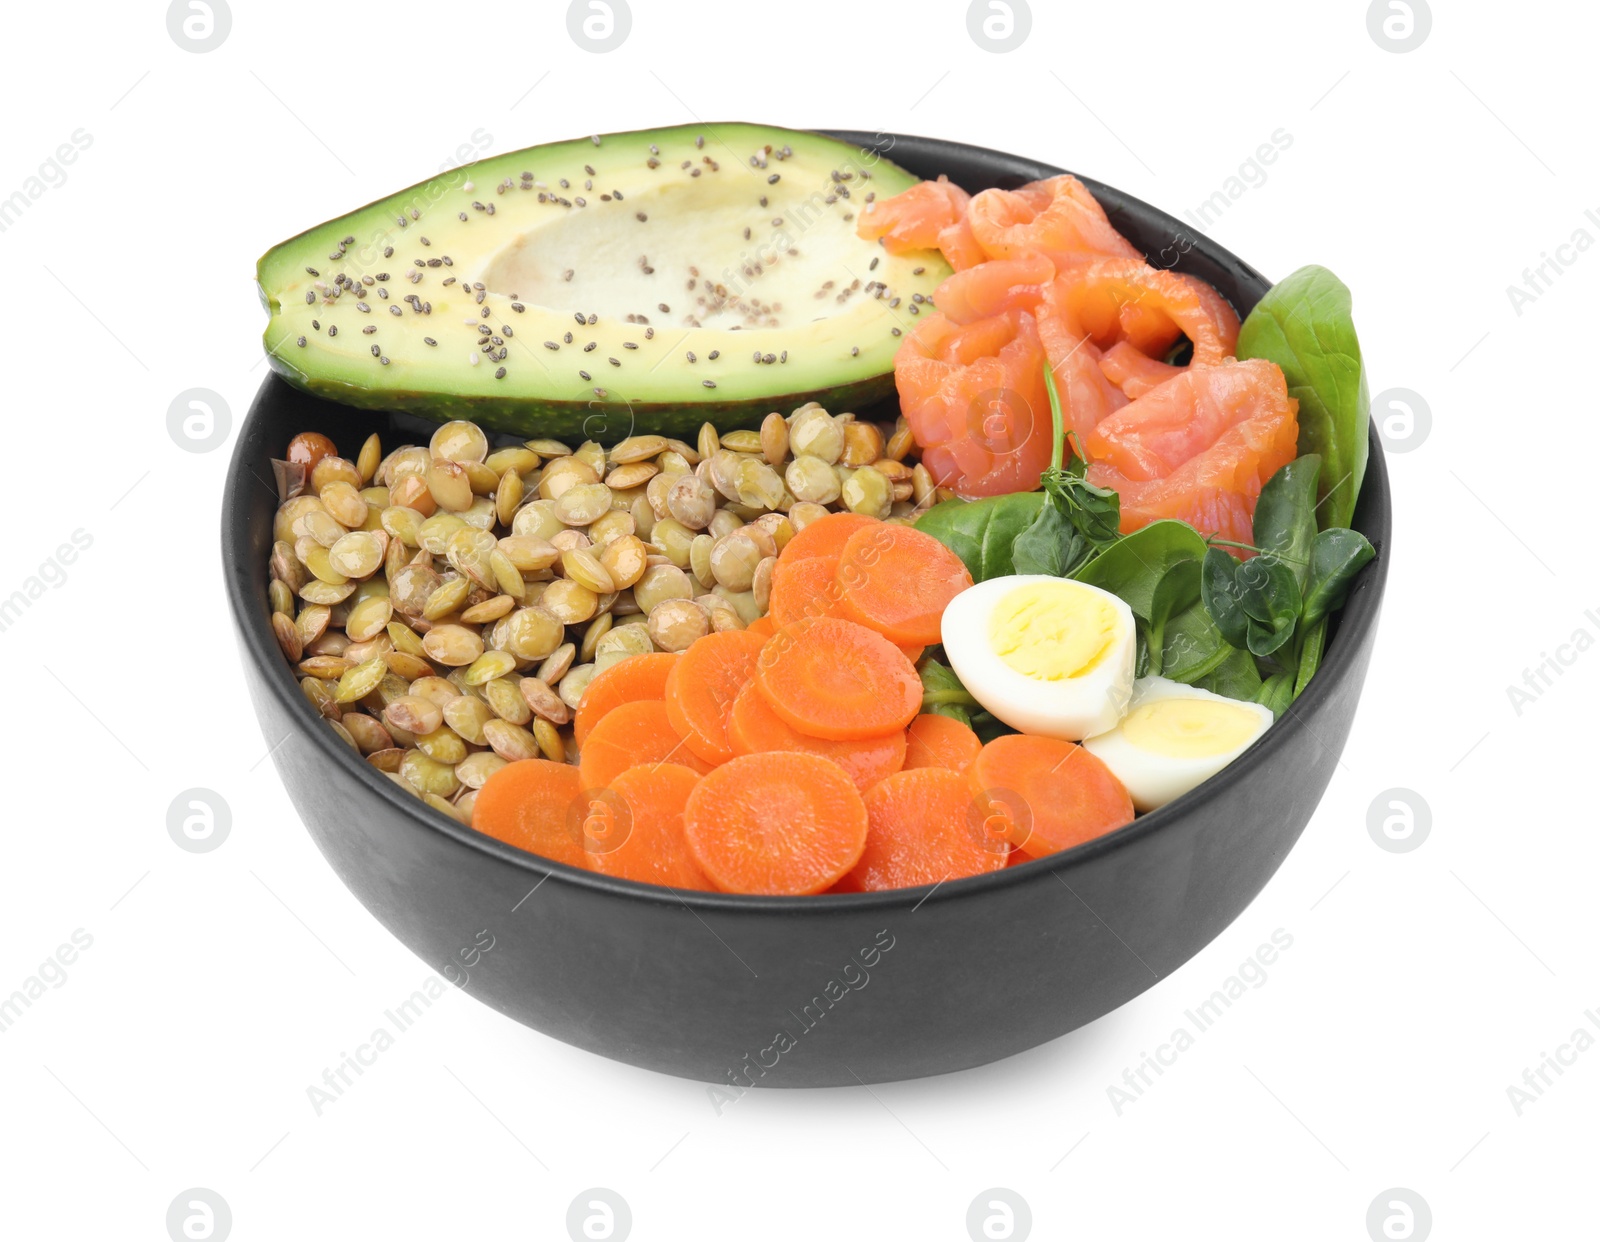 Photo of Delicious lentil bowl with carrot, avocado, egg and salmon on white background